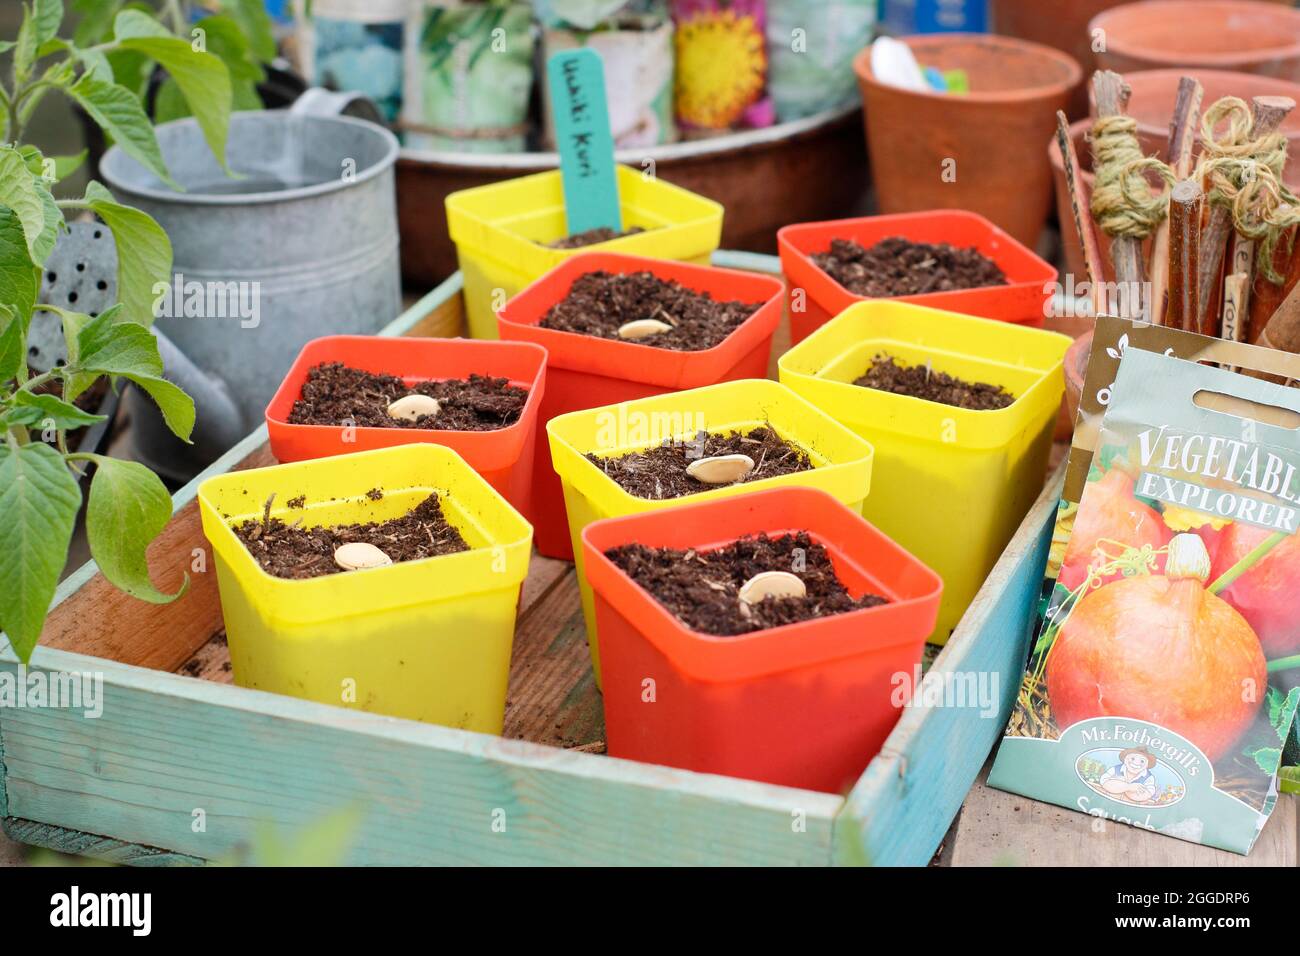 Sowing squash. Sowing winter squash 'Uchiki Kiri' by placing each seed on its side edge individually in pots. UK Stock Photo